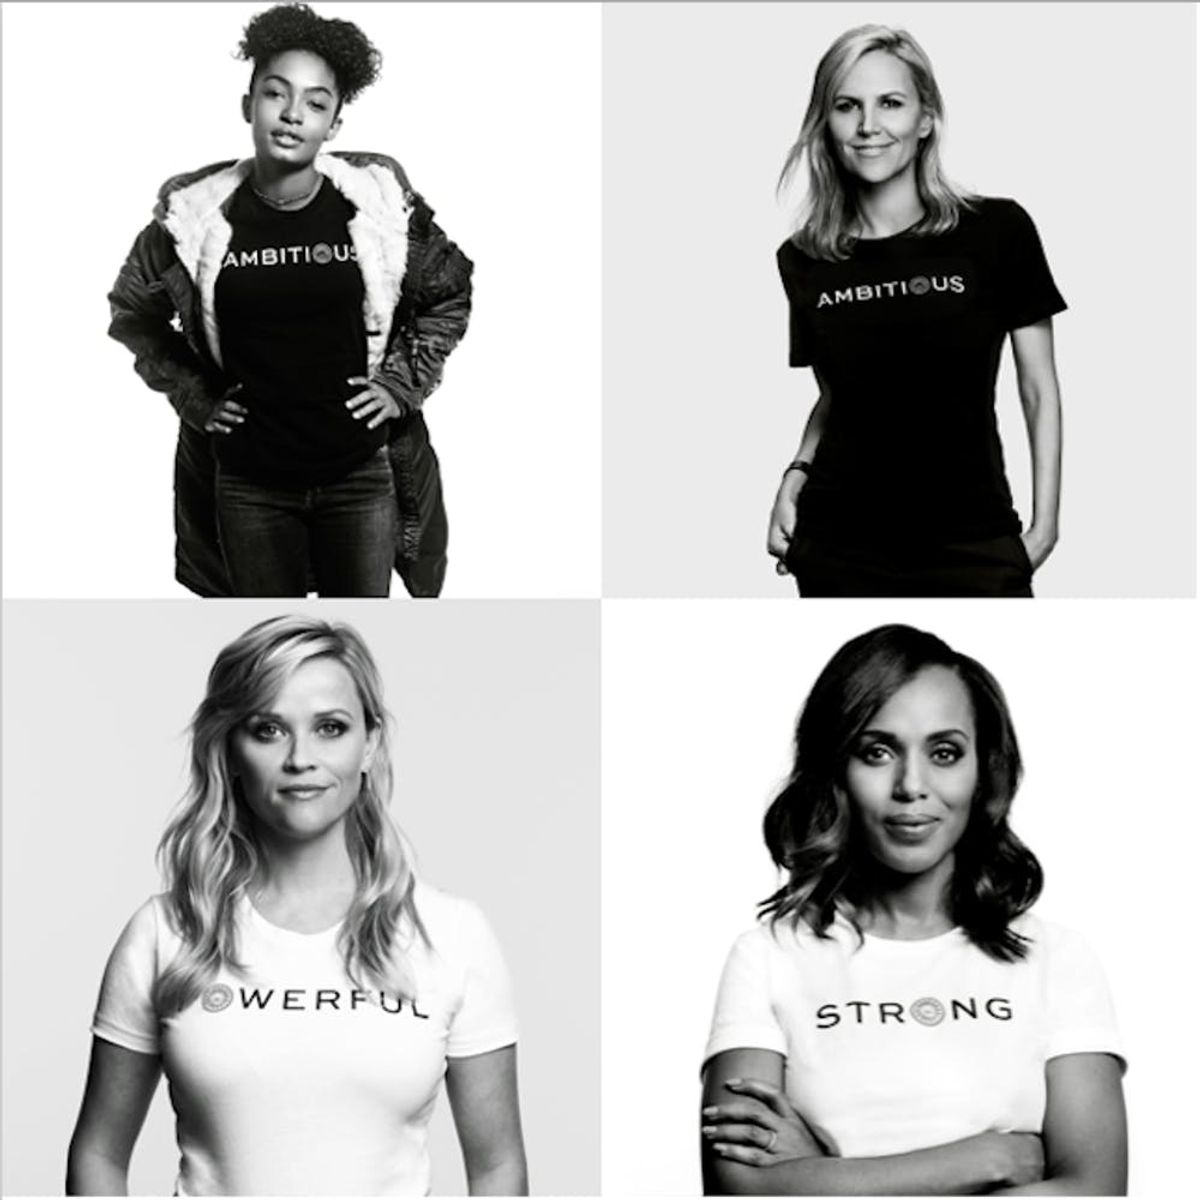 Tory Burch Taps Reese Witherspoon, Kerry Washington, More Celebs to Help Us #EmbraceAmbition This Women’s Day